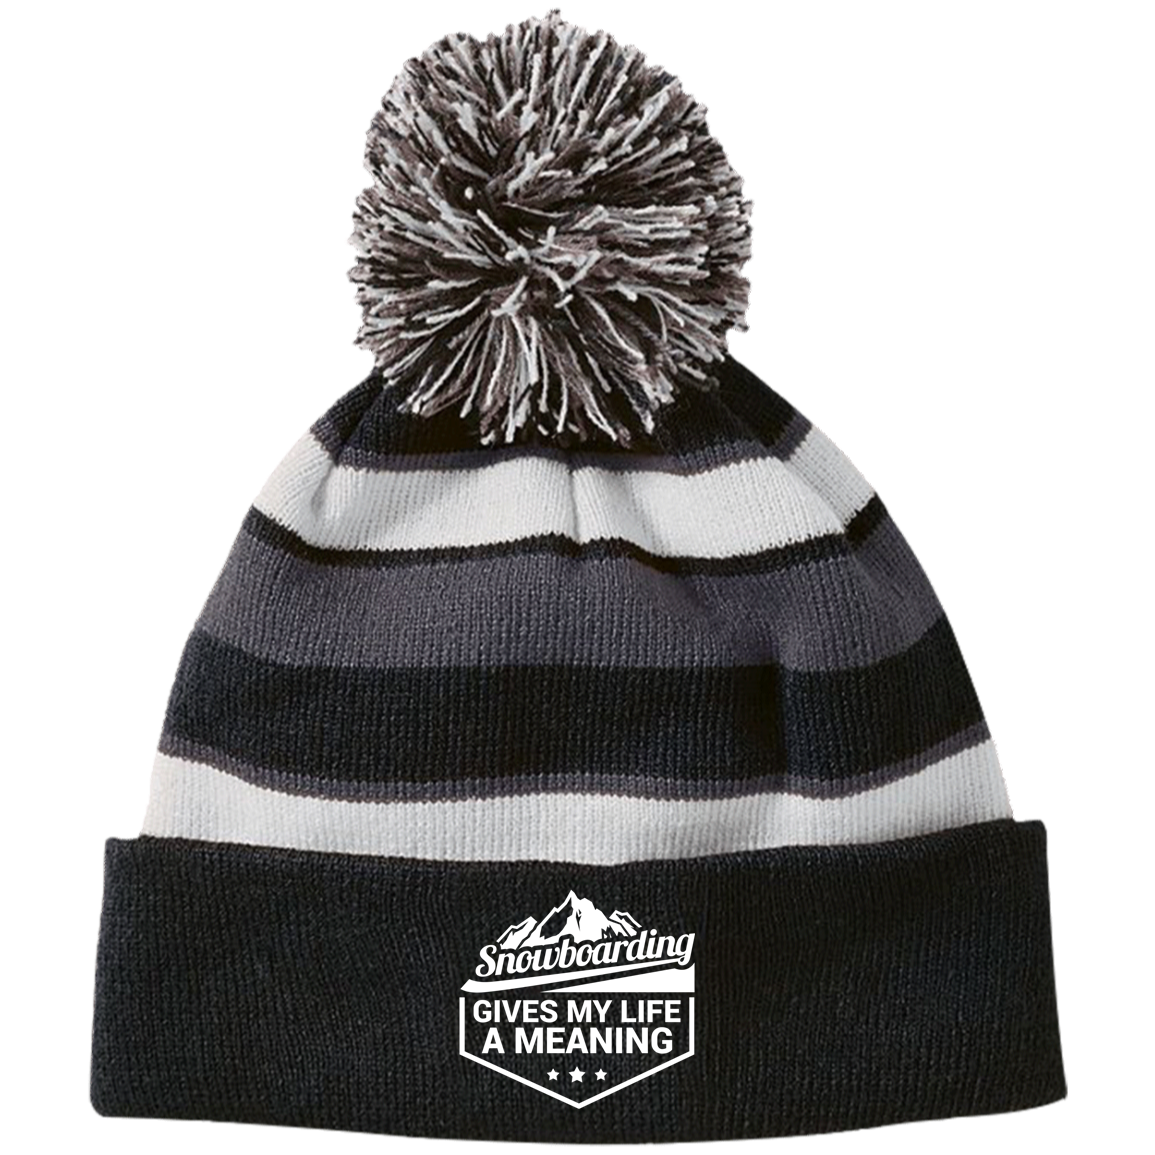 Snowboarding Gives My Life a Meaning Striped Beanie - Powderaddicts